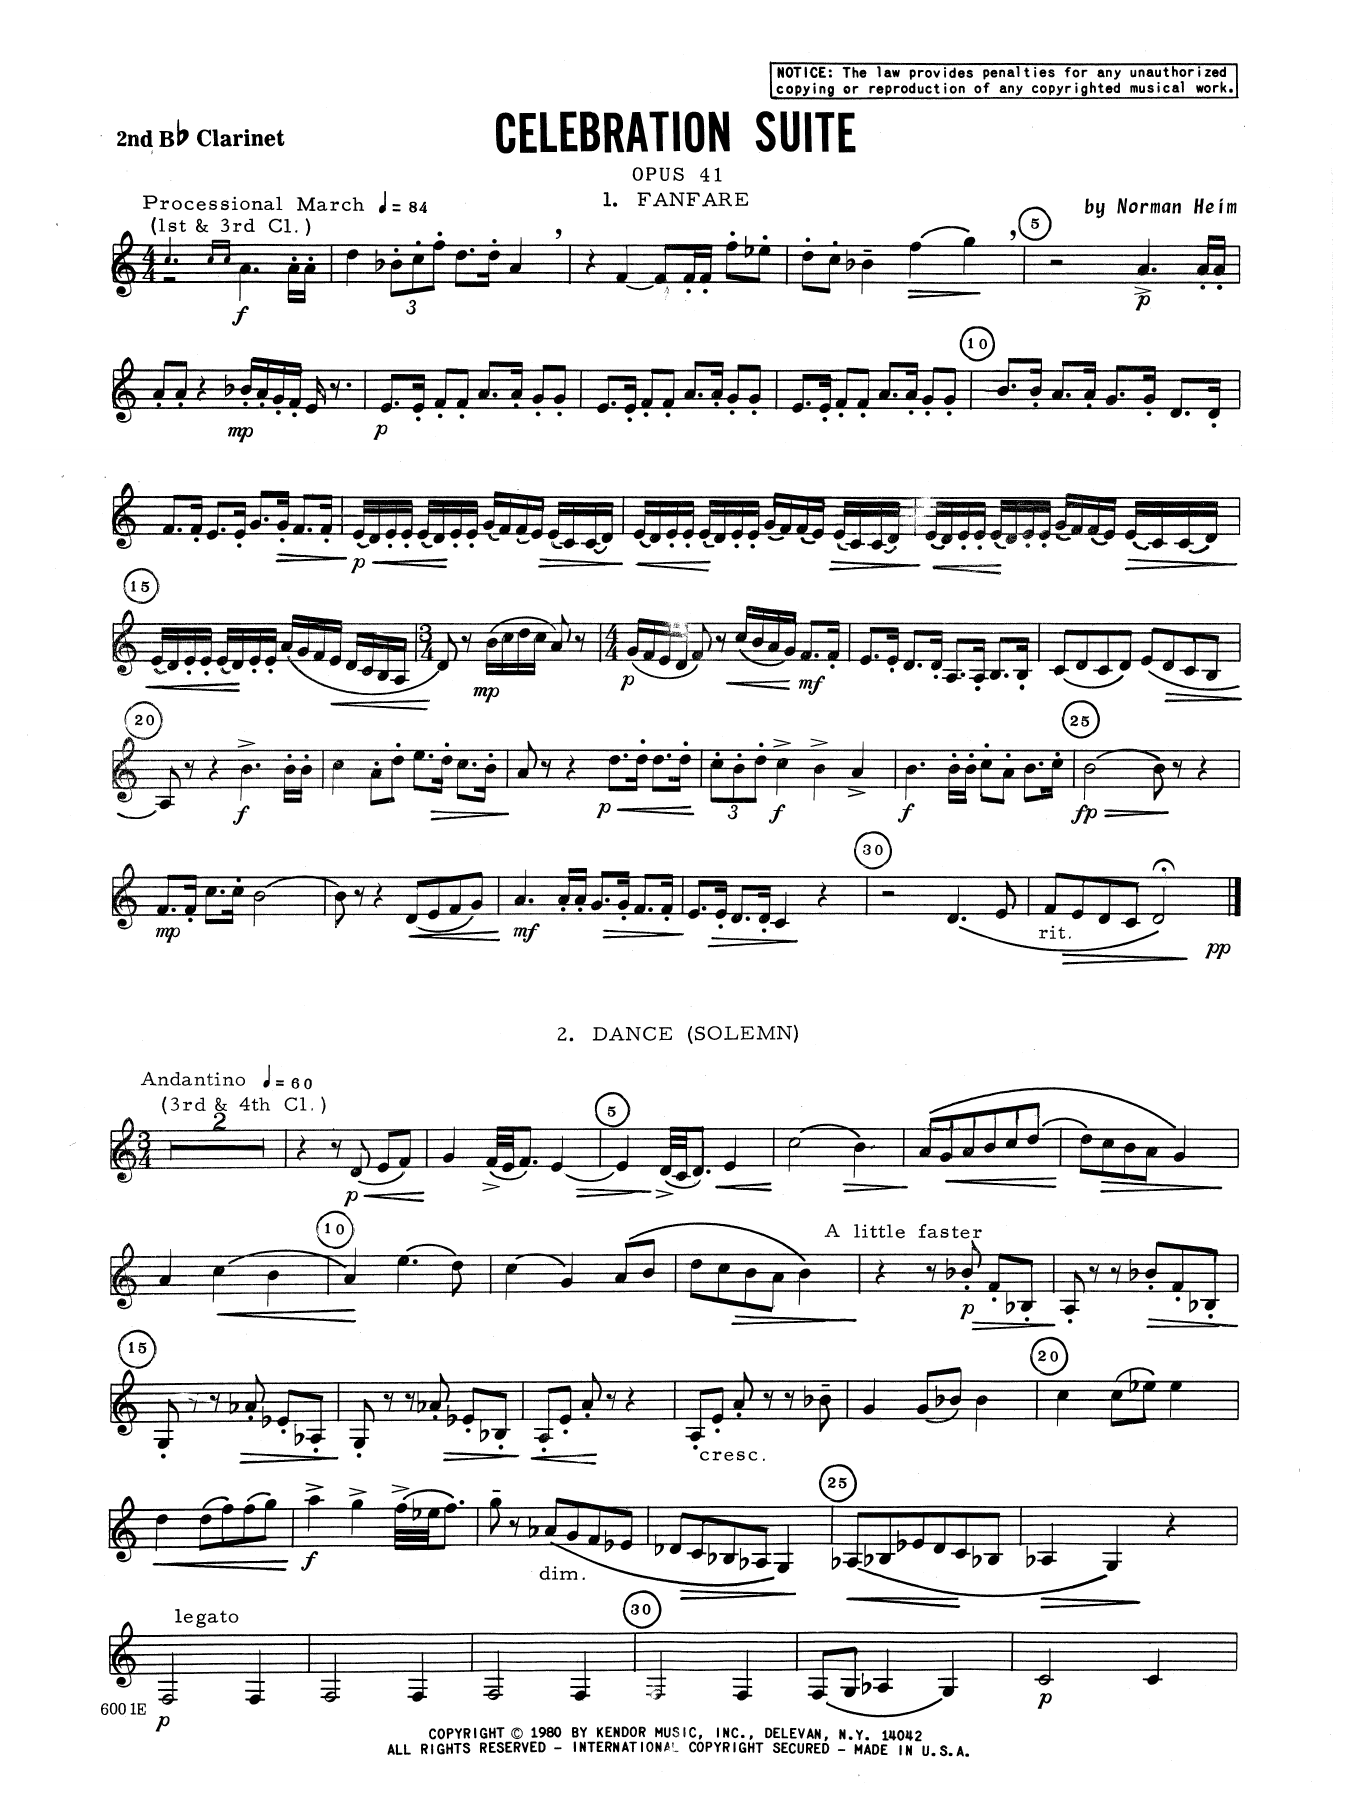 Heim Celebration Suite - 2nd Bb Clarinet sheet music notes and chords. Download Printable PDF.